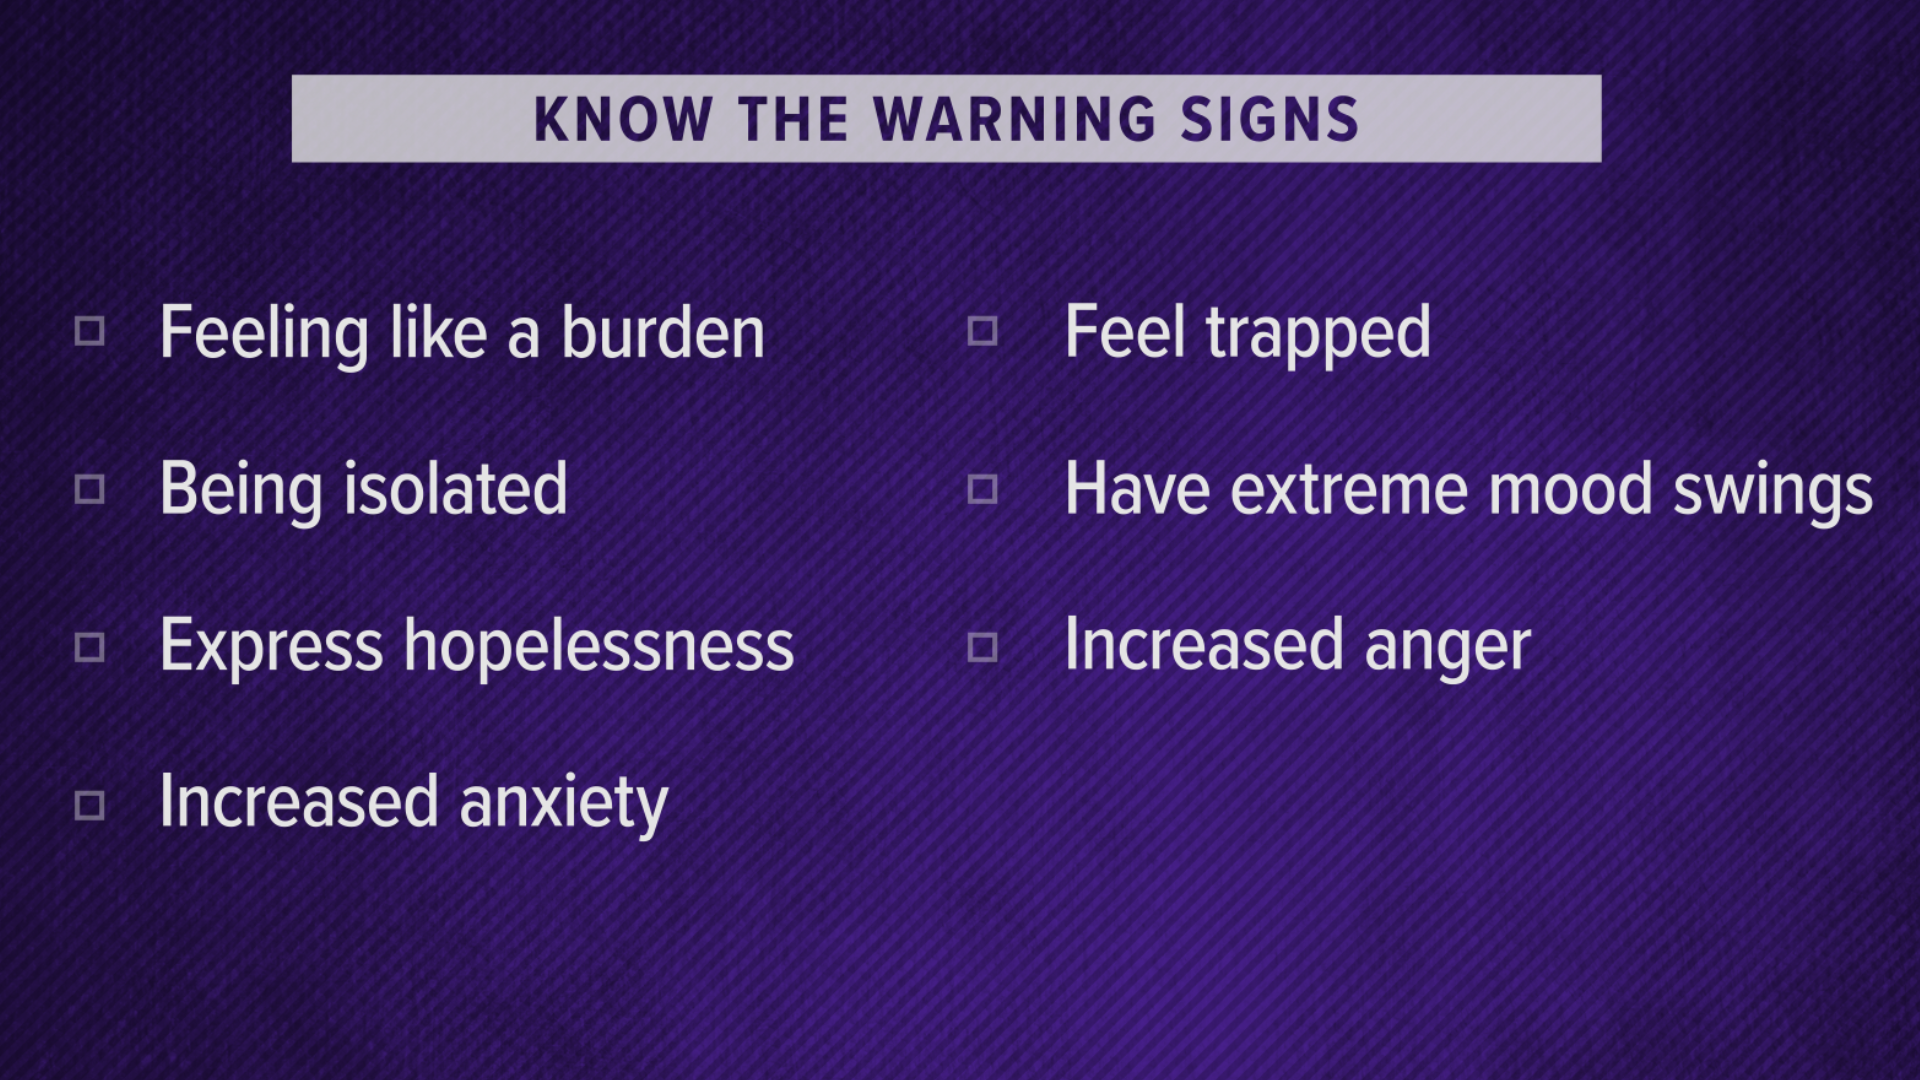 Knowing the warning signs and how to help someone who may be depressed and considering suicide.